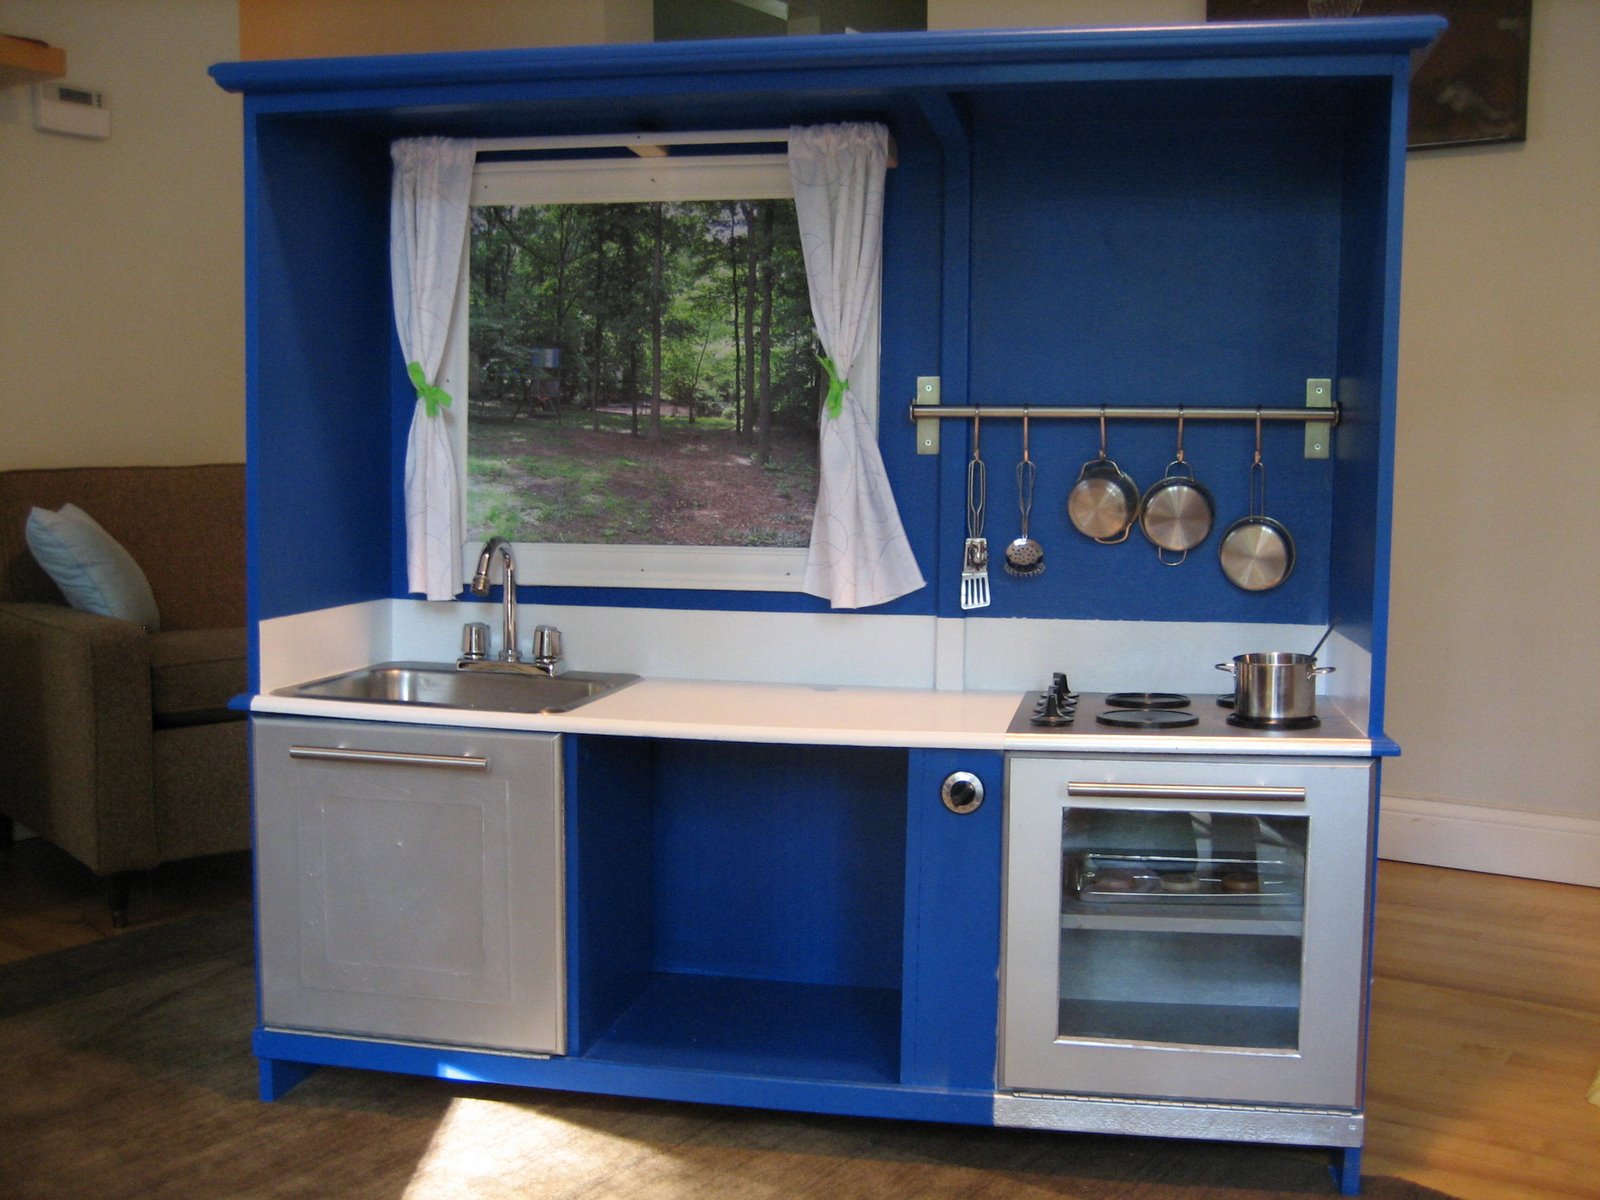 Go on over to this blog for the "play by play" on building the kitchen ...